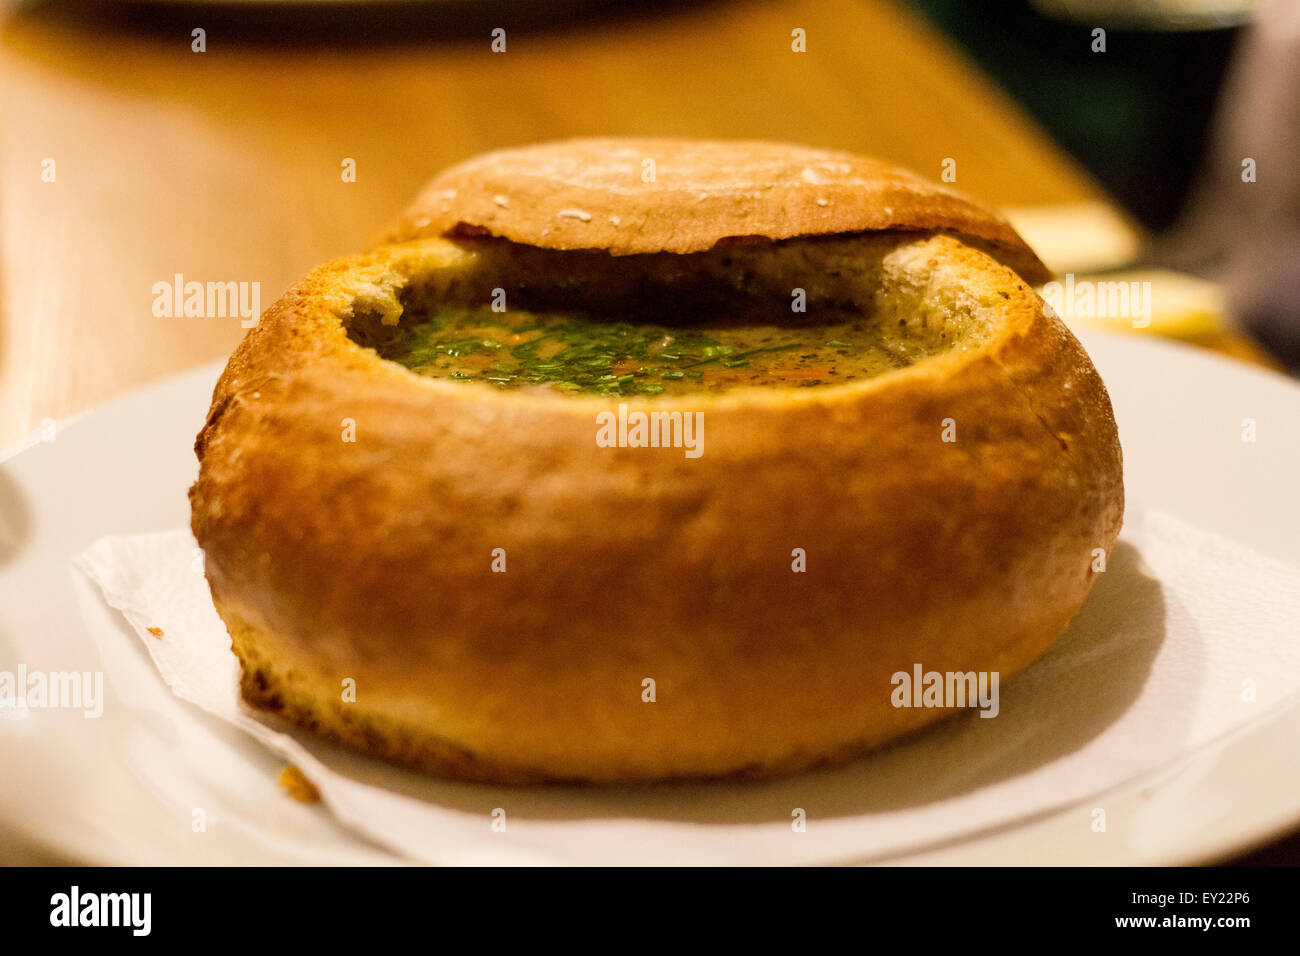 Soup served in a bread bowl, typical Czech plate Stock Photo